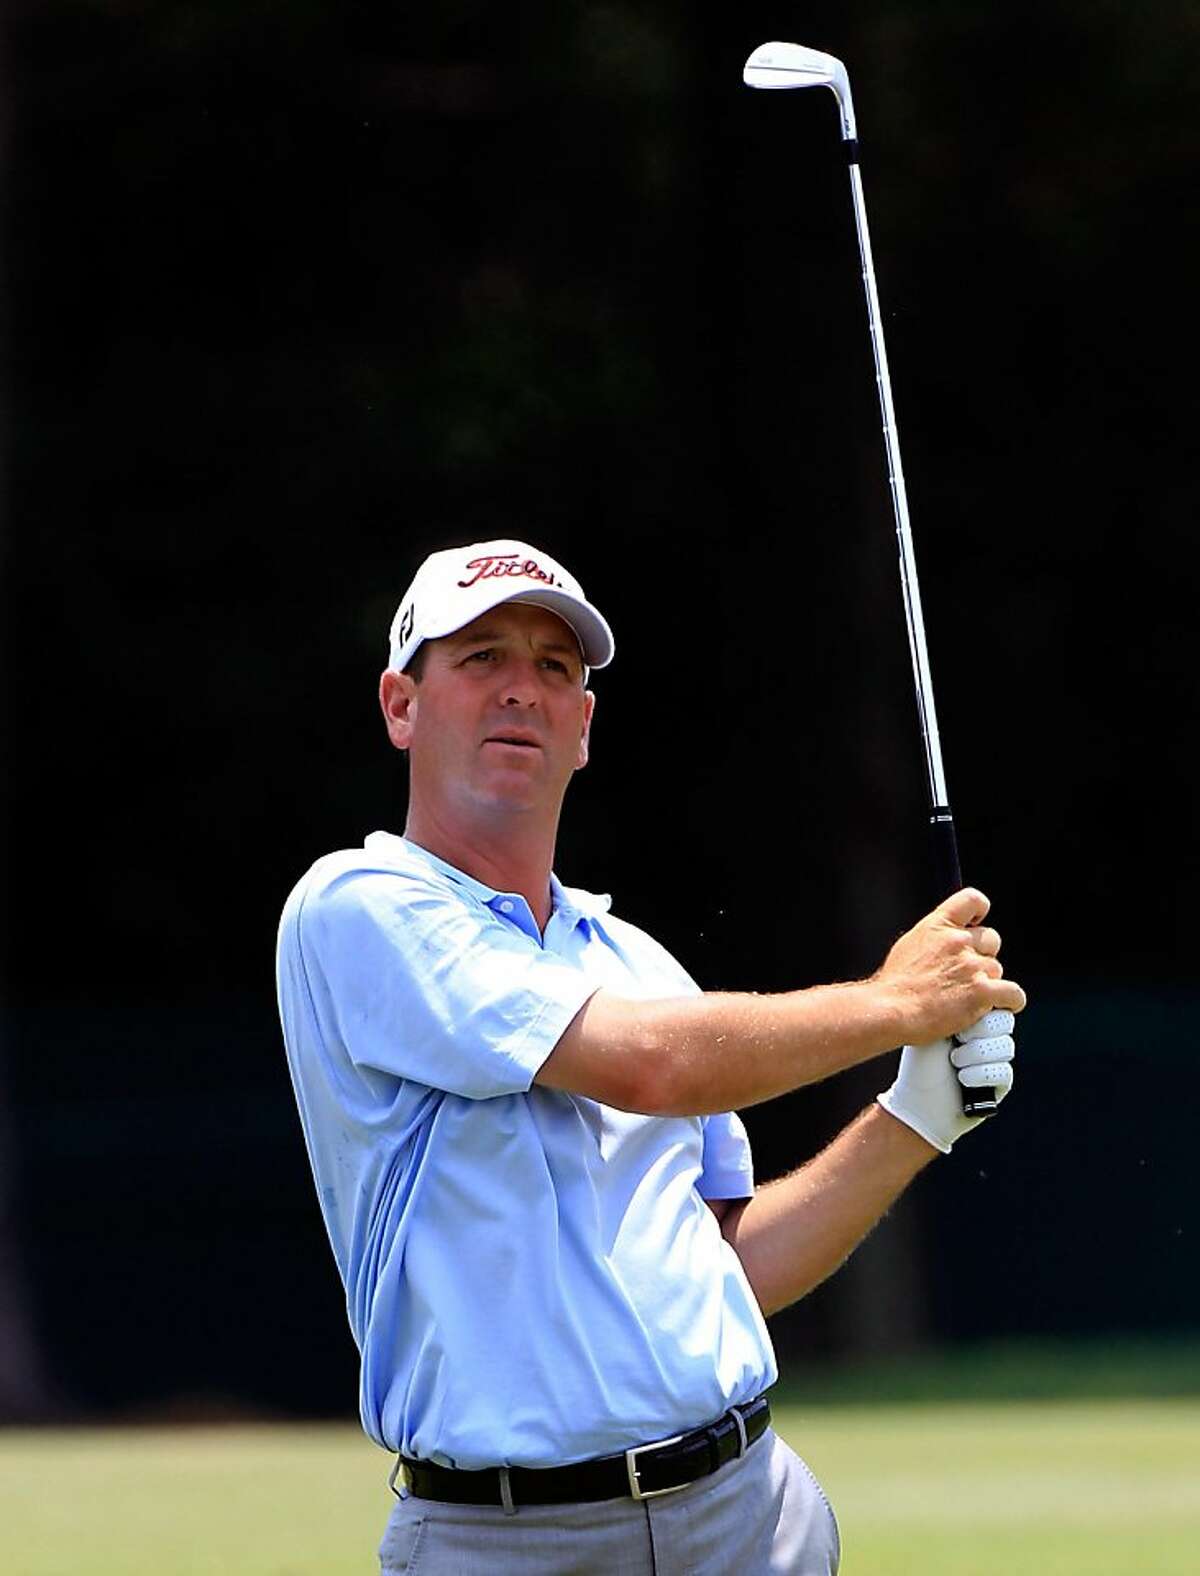 Harrison Frazar hits a shot on the 6th hole during the third round of the FedEx St. Jude Classic at TPC Southwind on June 11, 2011 in Memphis, Tennessee.